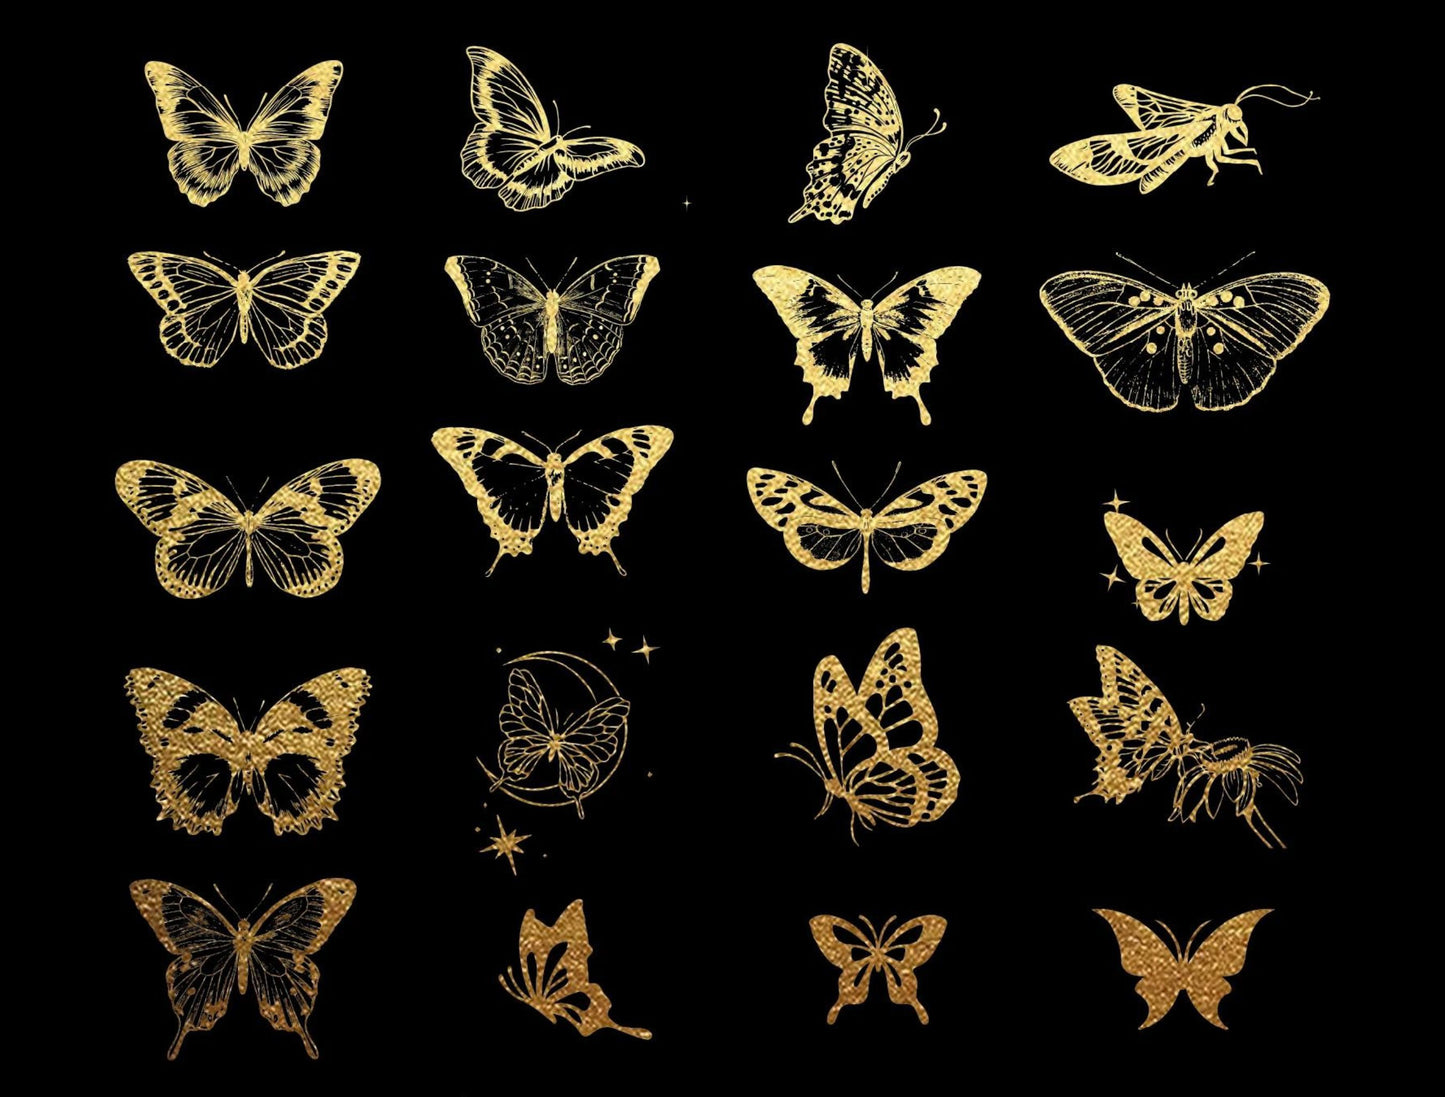 40 Pieces Gold Foil Holographic Stickers, Celestial Stickers, Gold Butterfly Stickers, Gold Sun and Moon Stickers